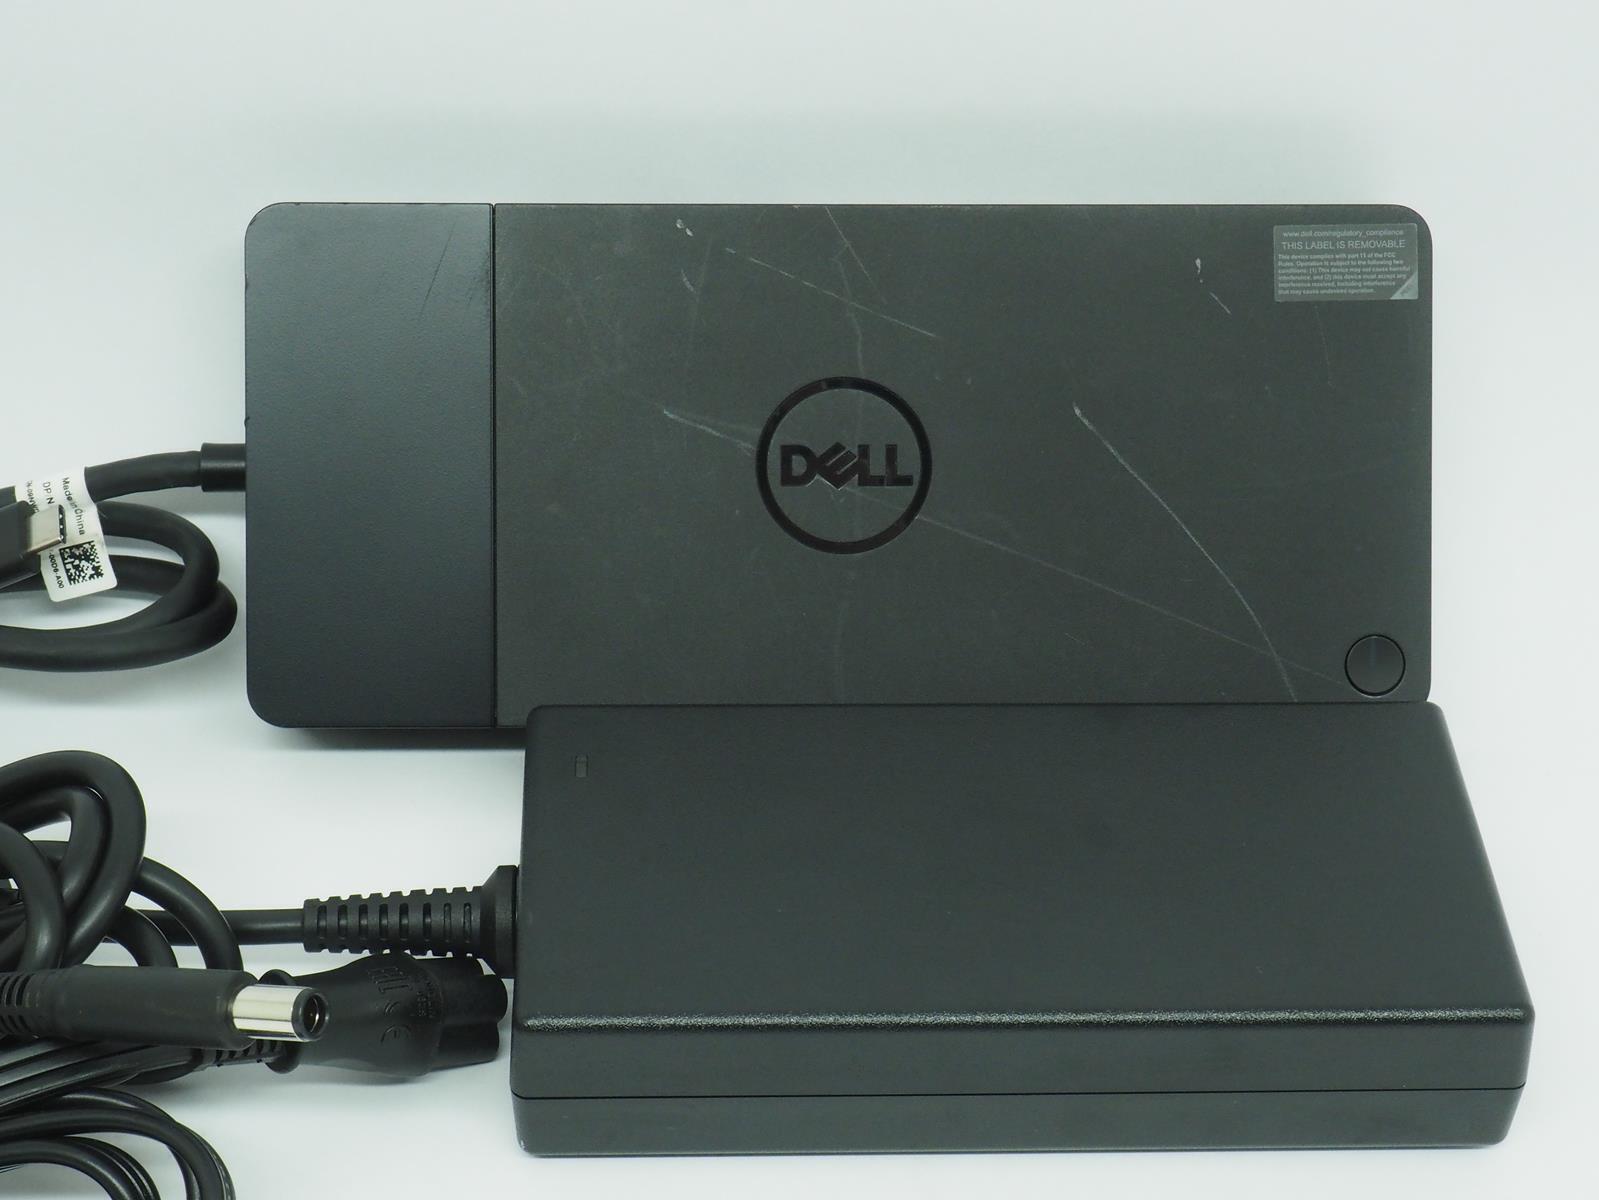 DELL WD22TB4 Thunderbolt 4 Docking Station *180w Power Supply Included* Working